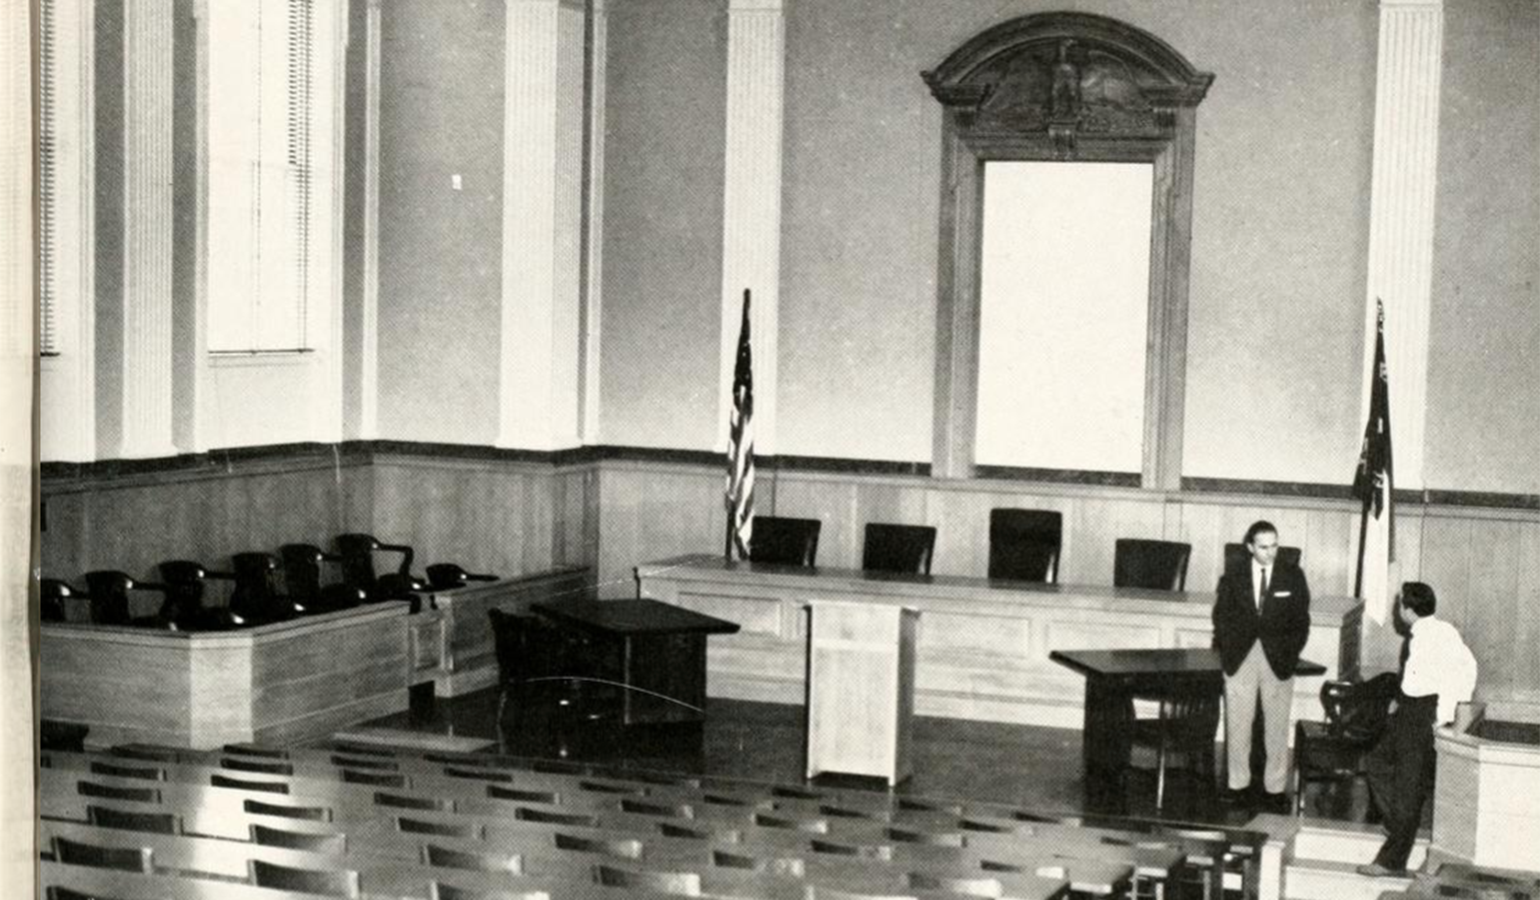 A new courtroom in the law school building on Wake Forest College’s Winston-Salem campus.